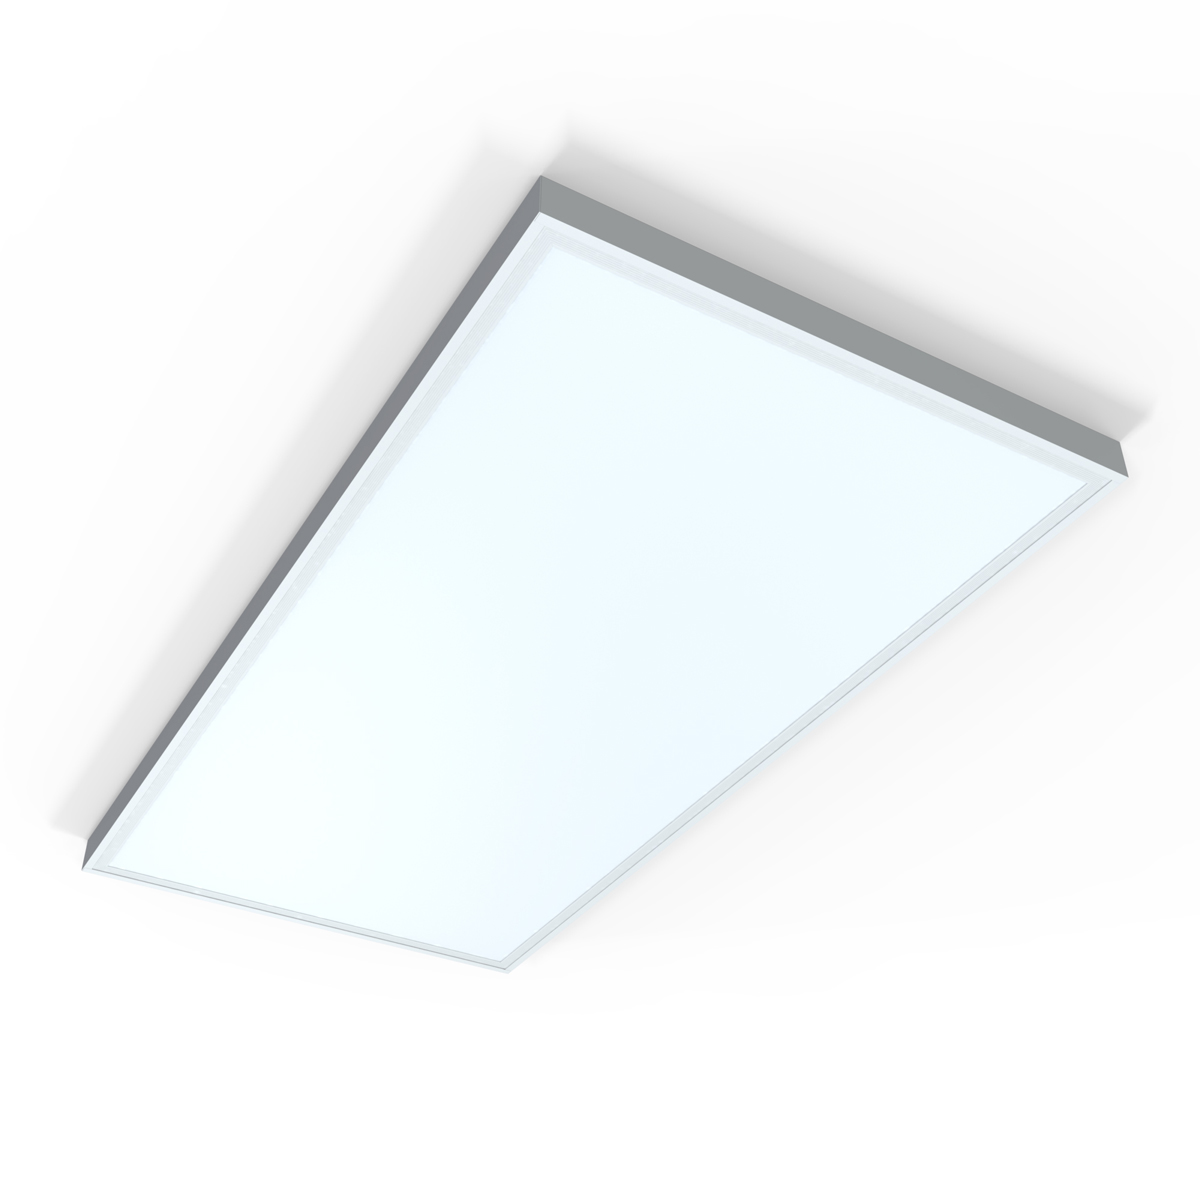 View 1200x600mm Surface Mounting Frame For LED Panel Lights information